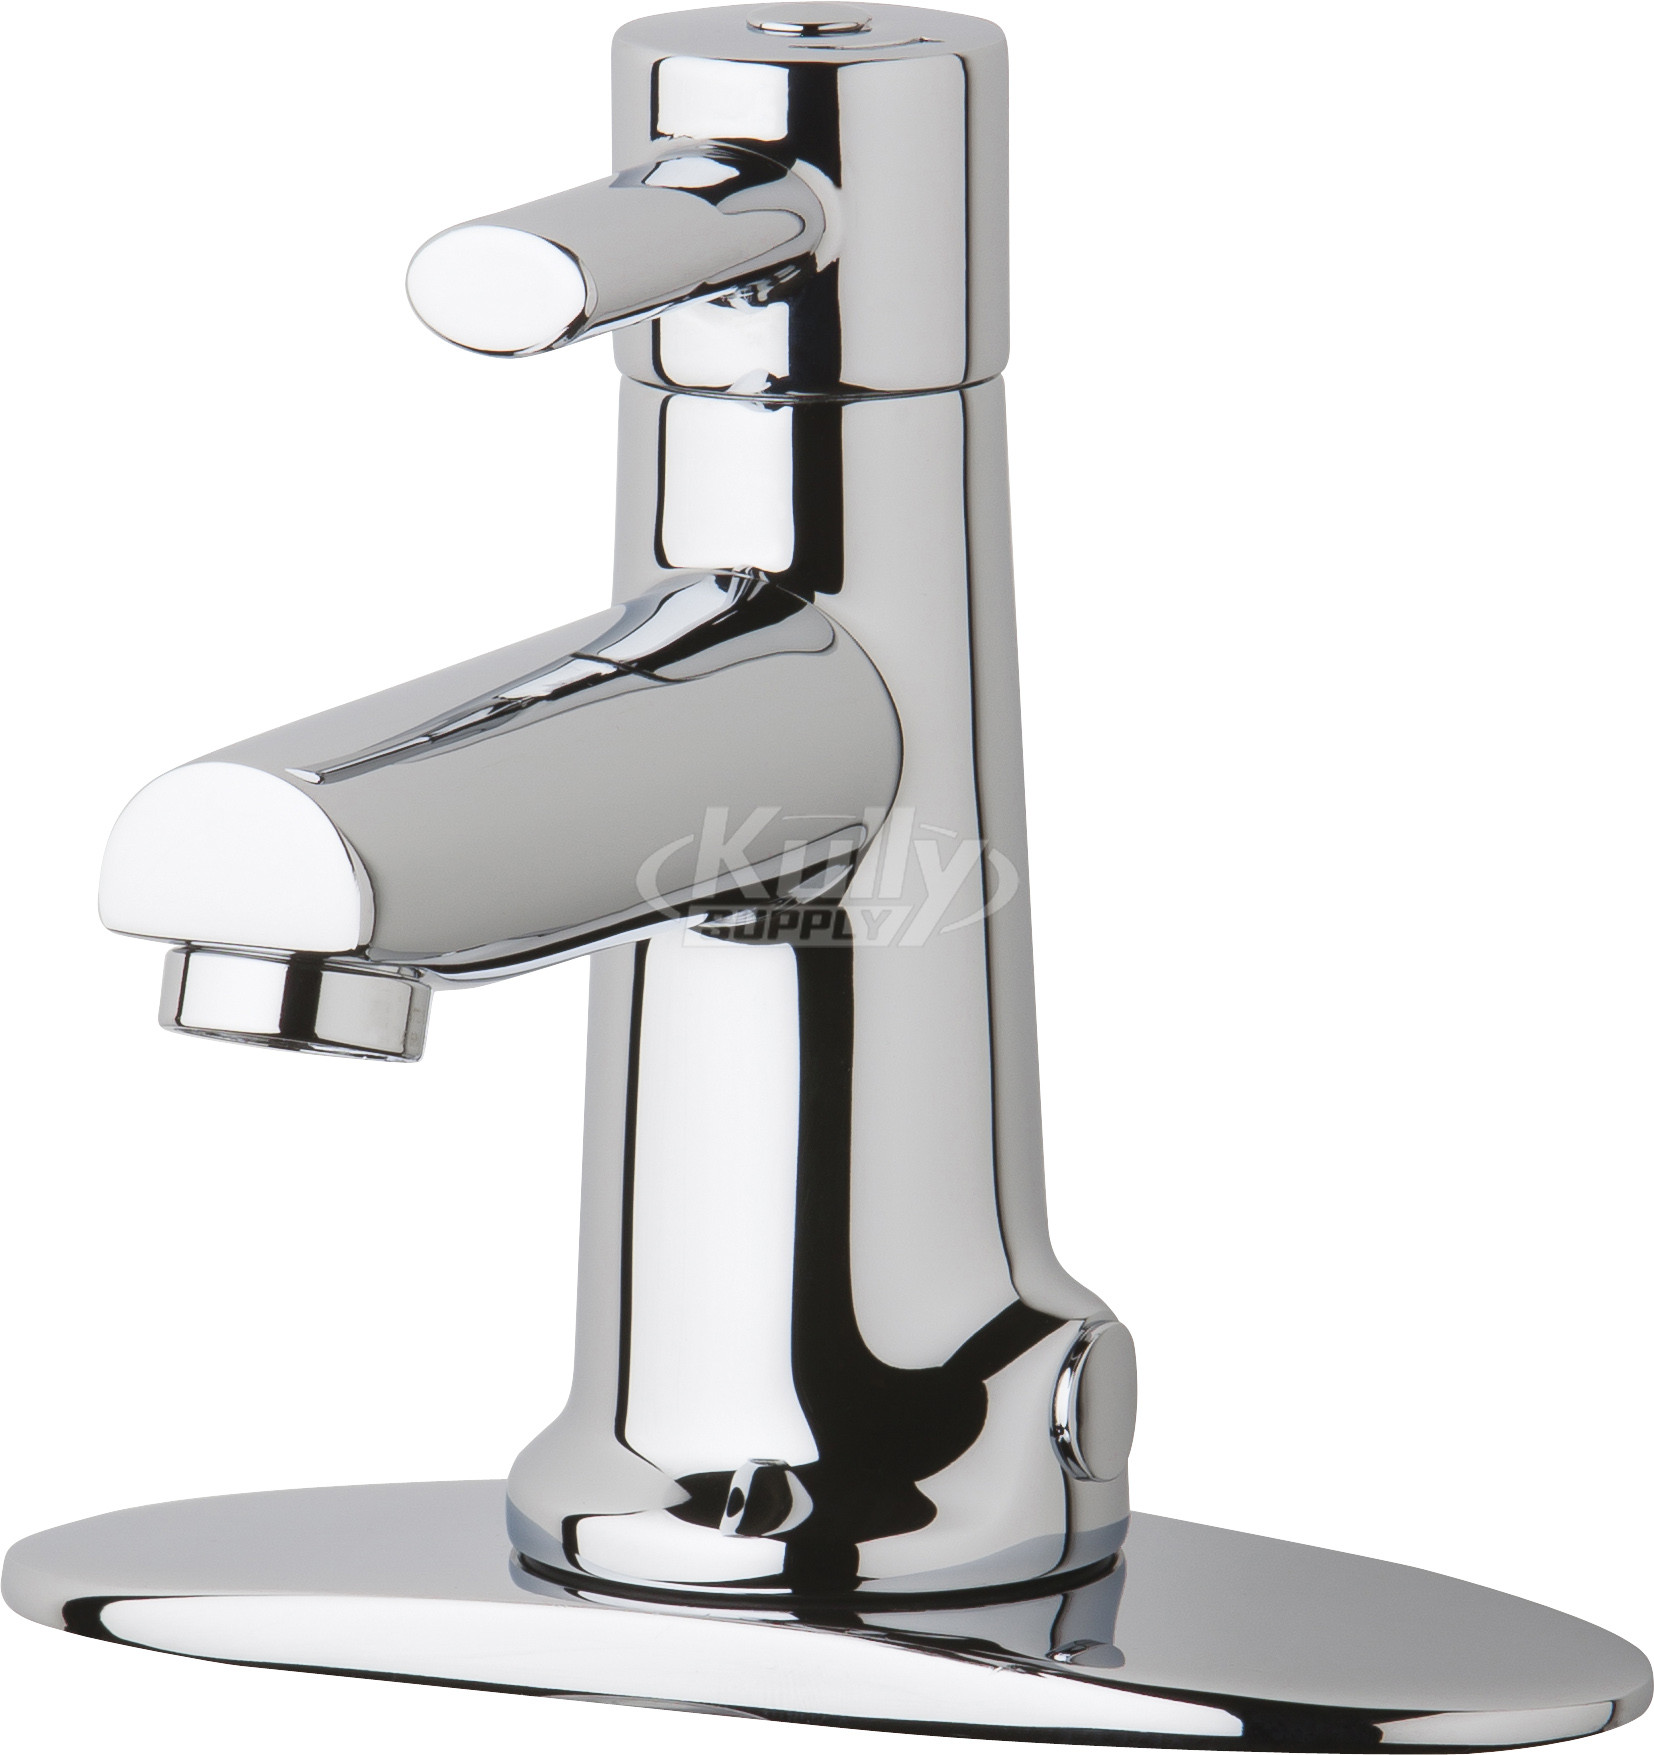 Chicago 3511-4E2805AB Hot & Cold Water Mixing Sink Faucet